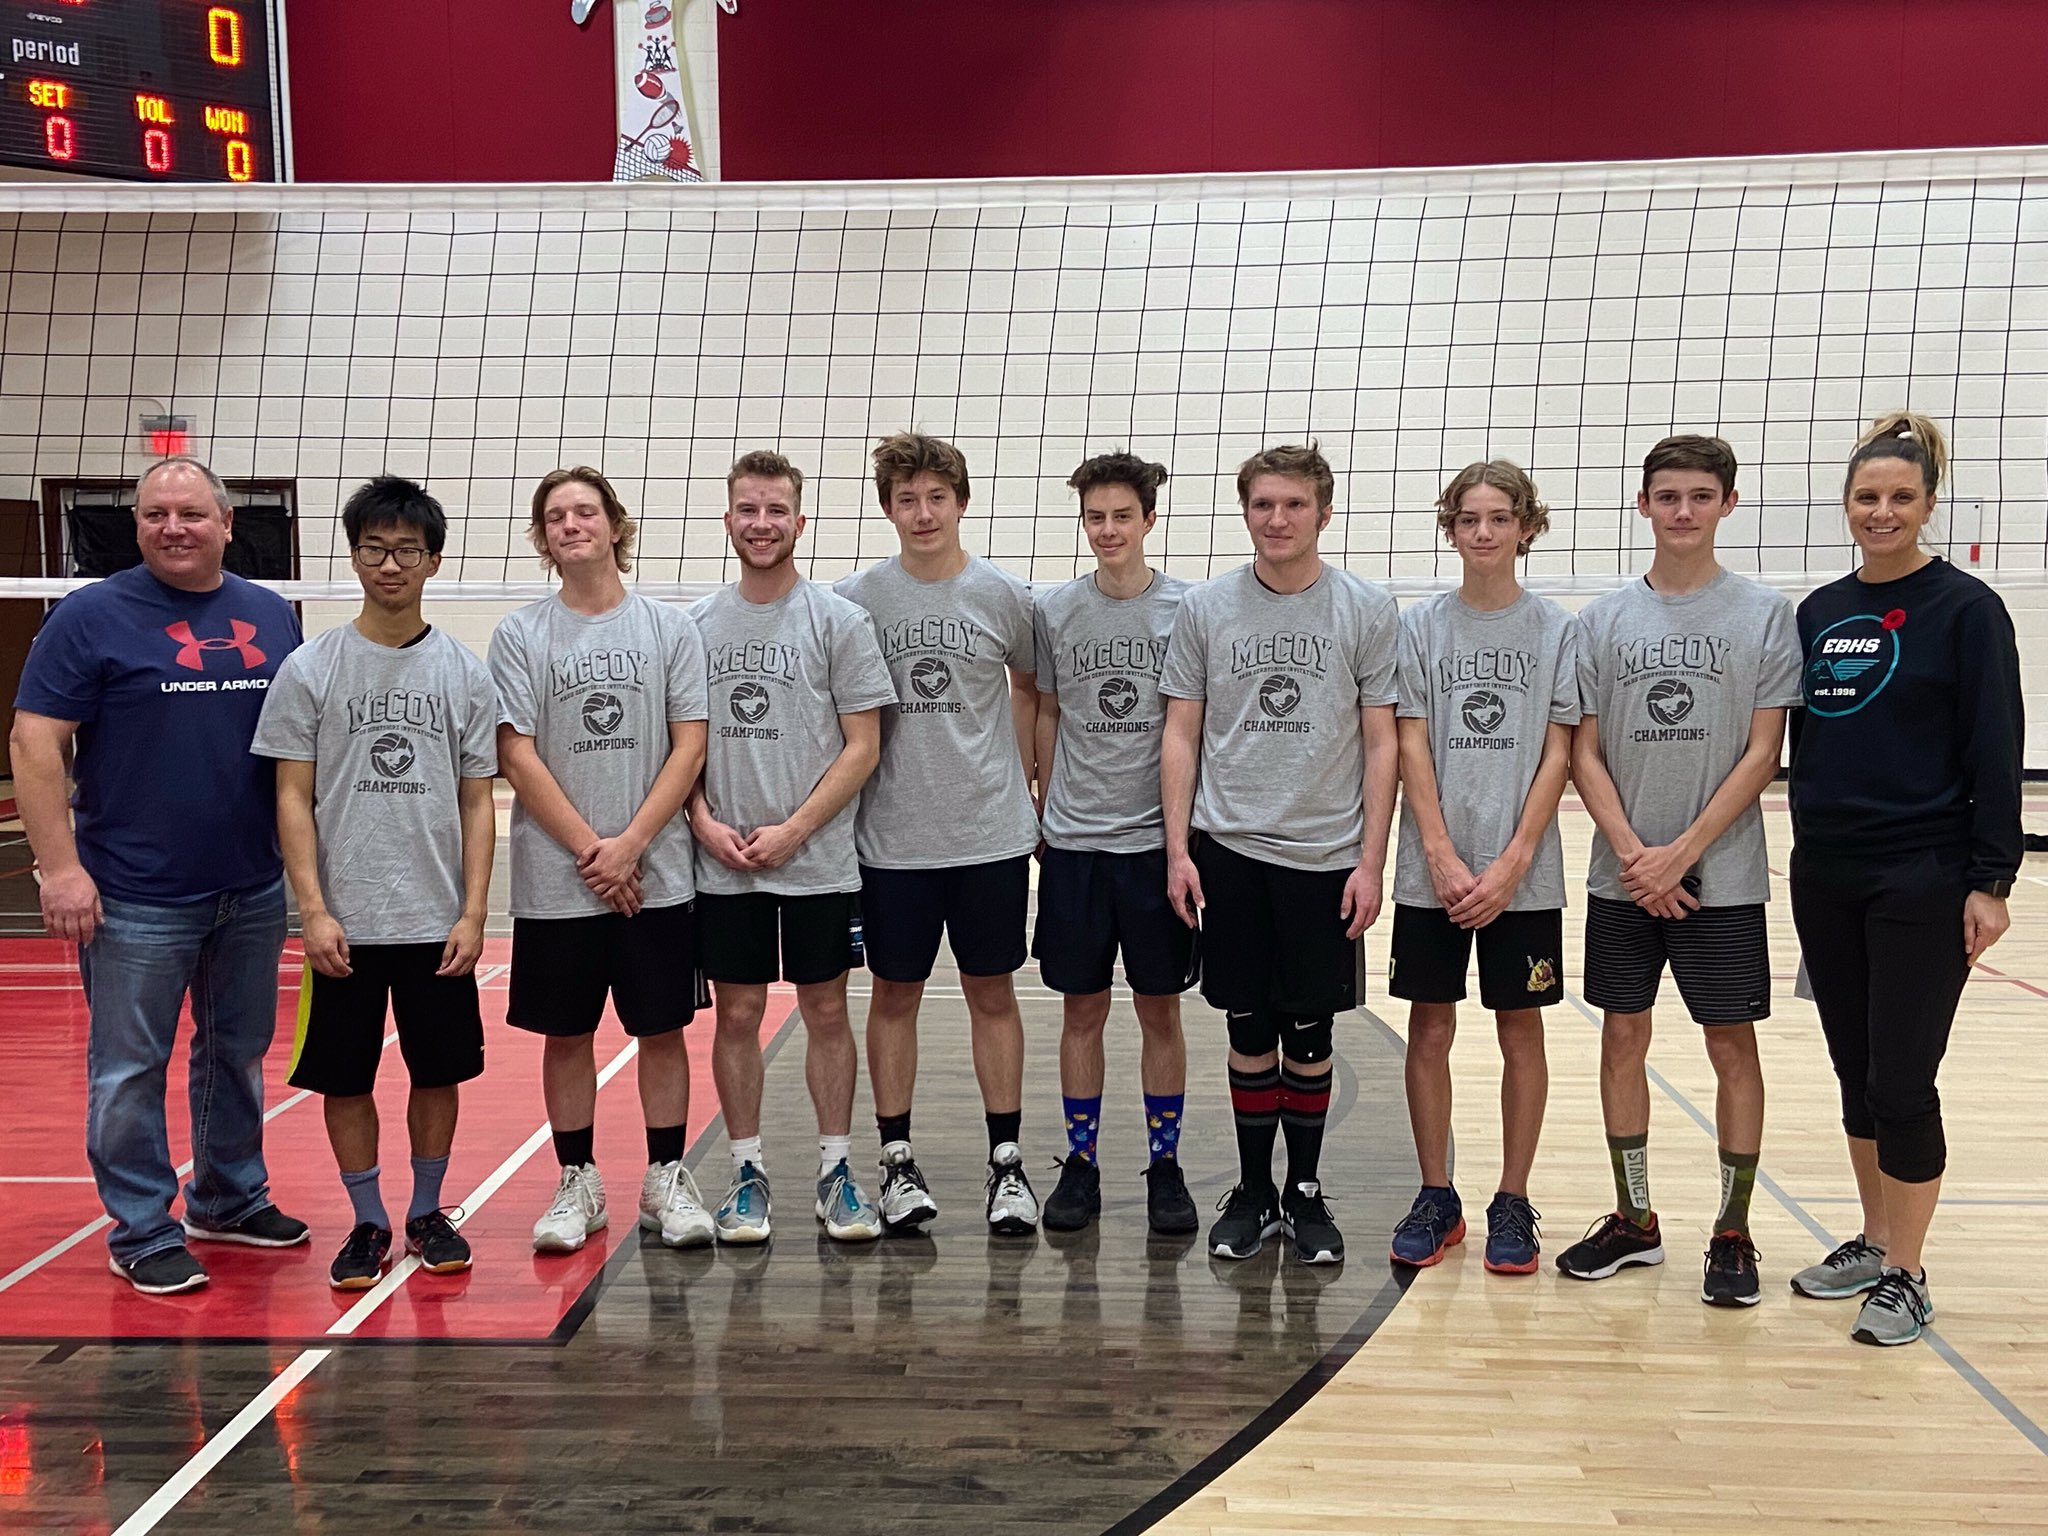 EagleButtePRSD8 on Twitter: "Congratulations to JV Volleyball team who ended season by winning the McCoy Volleyball tournament. Great boys! #eaglebutte #EBHS #prps #volleyball https://t.co/gNWTBT5diG" / Twitter